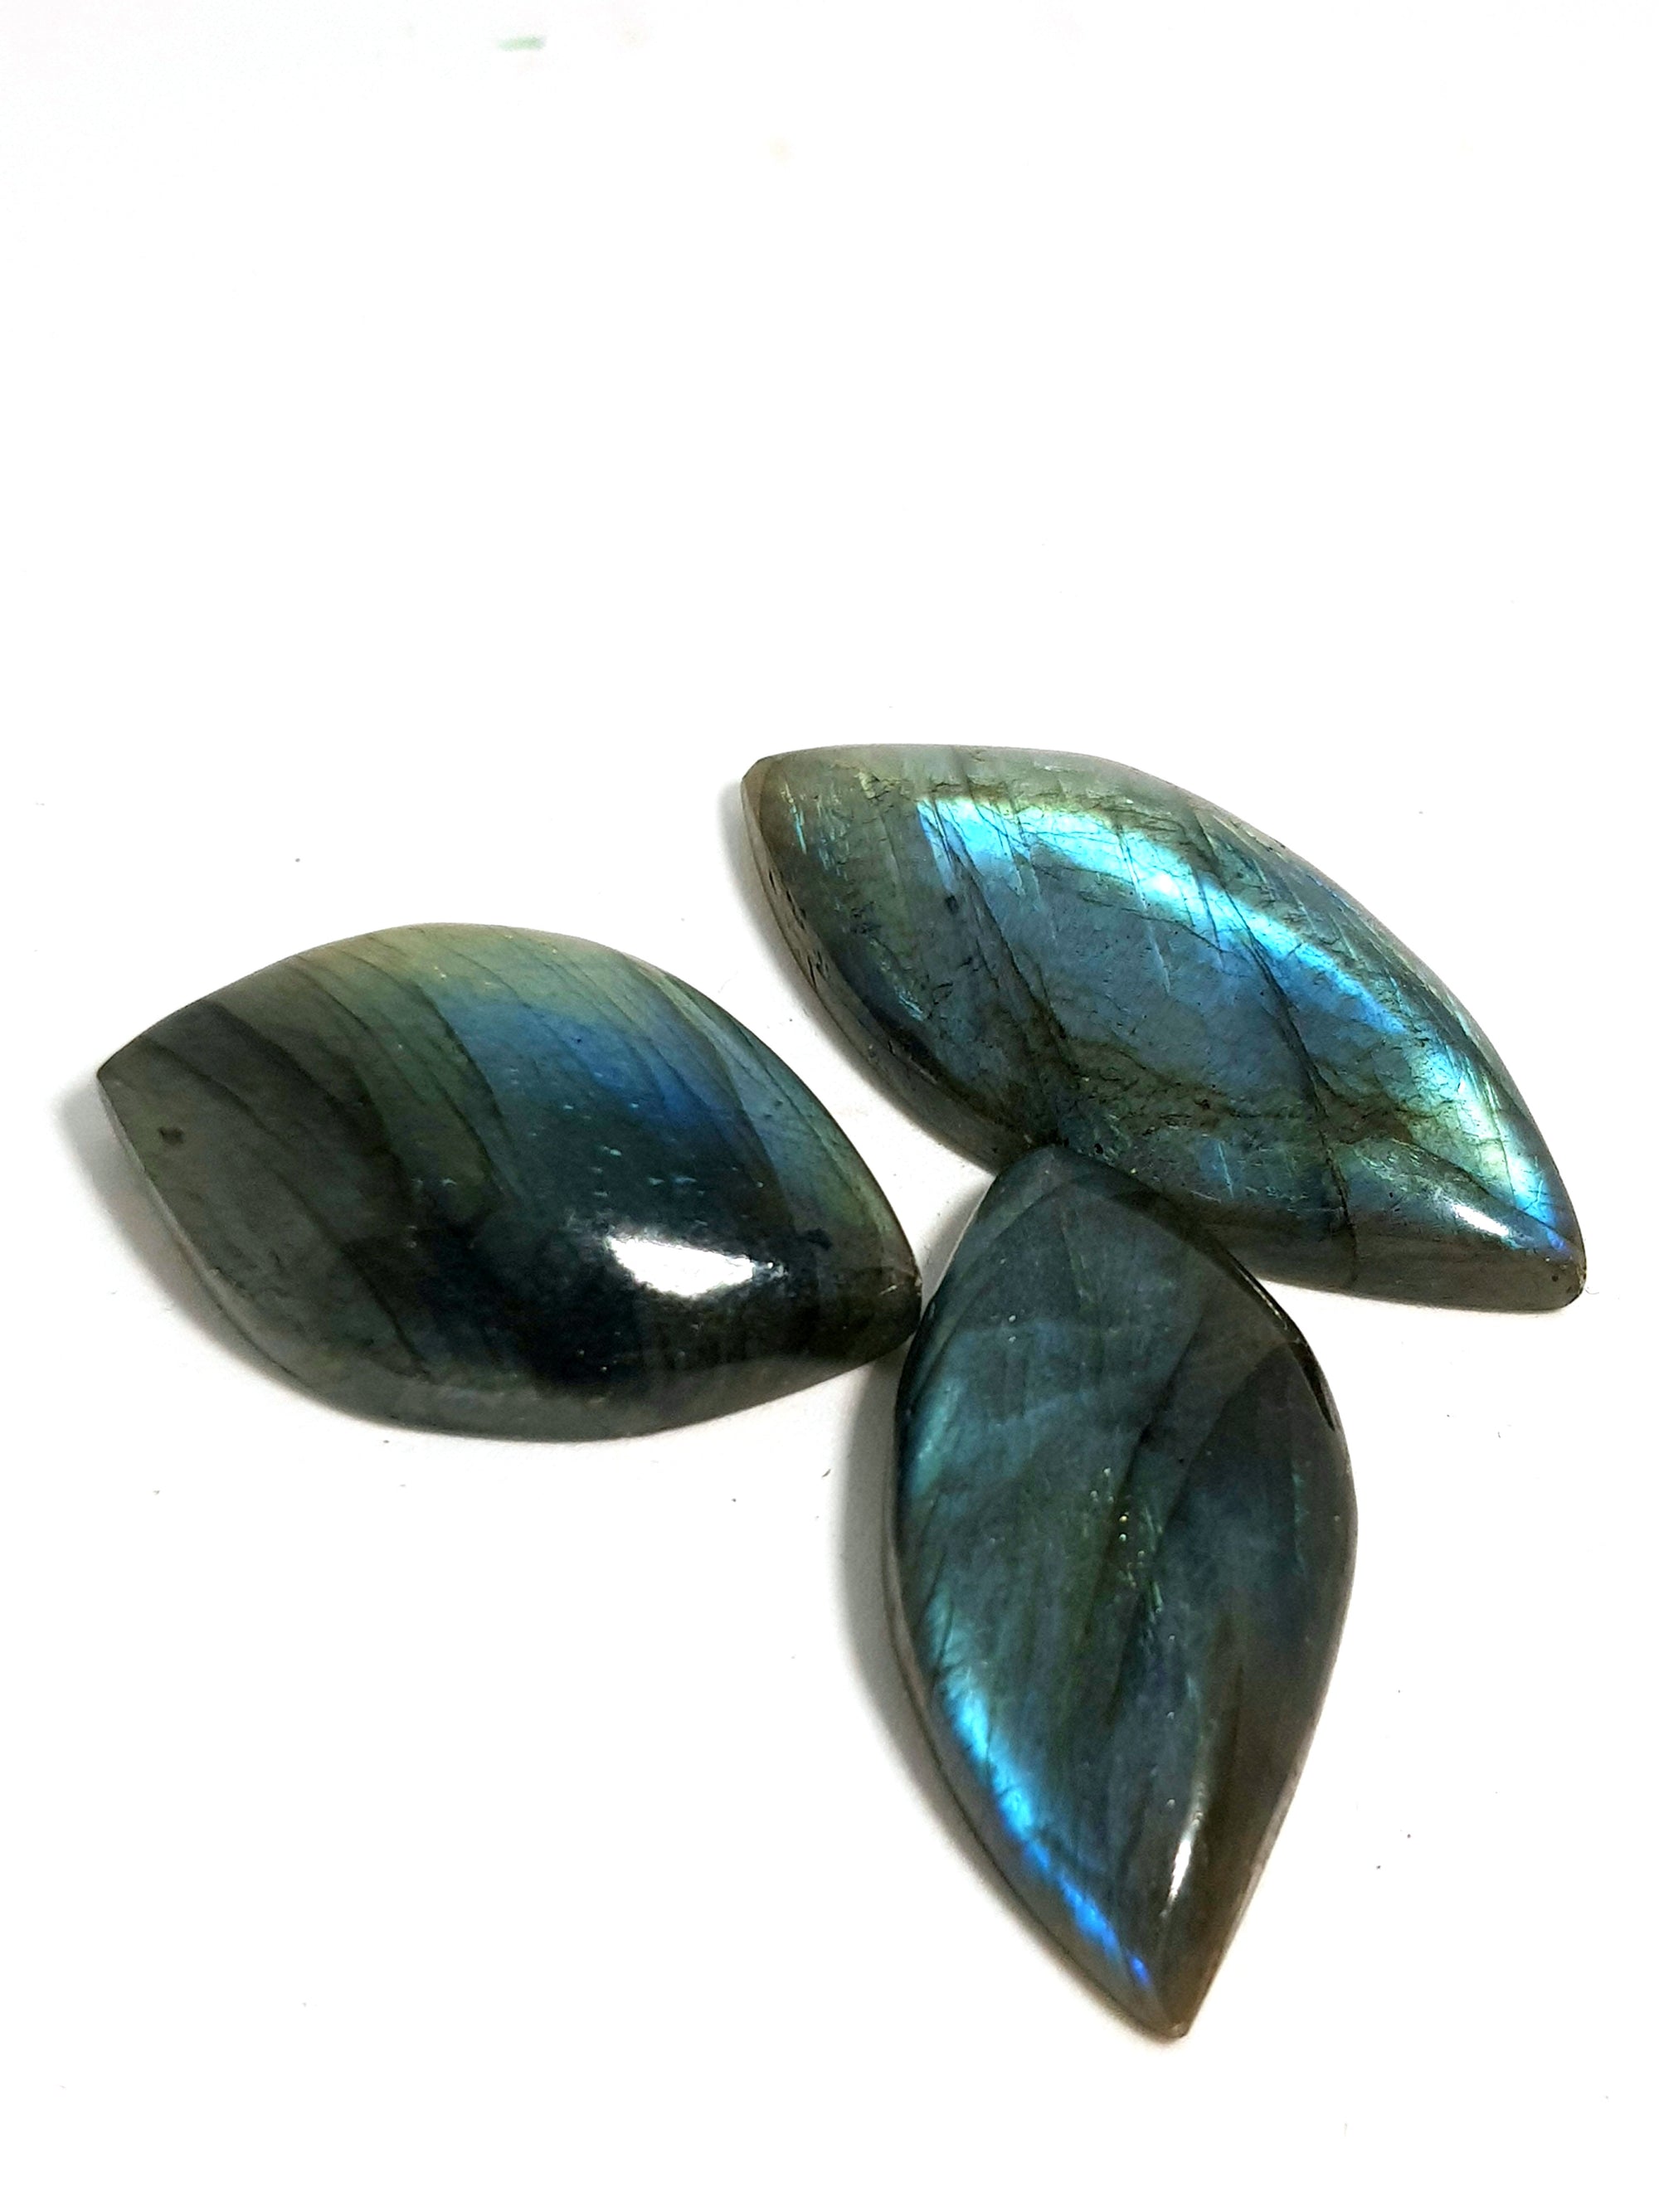 tear shaped polished pieces of labradorite with a flat back and beveled sides 